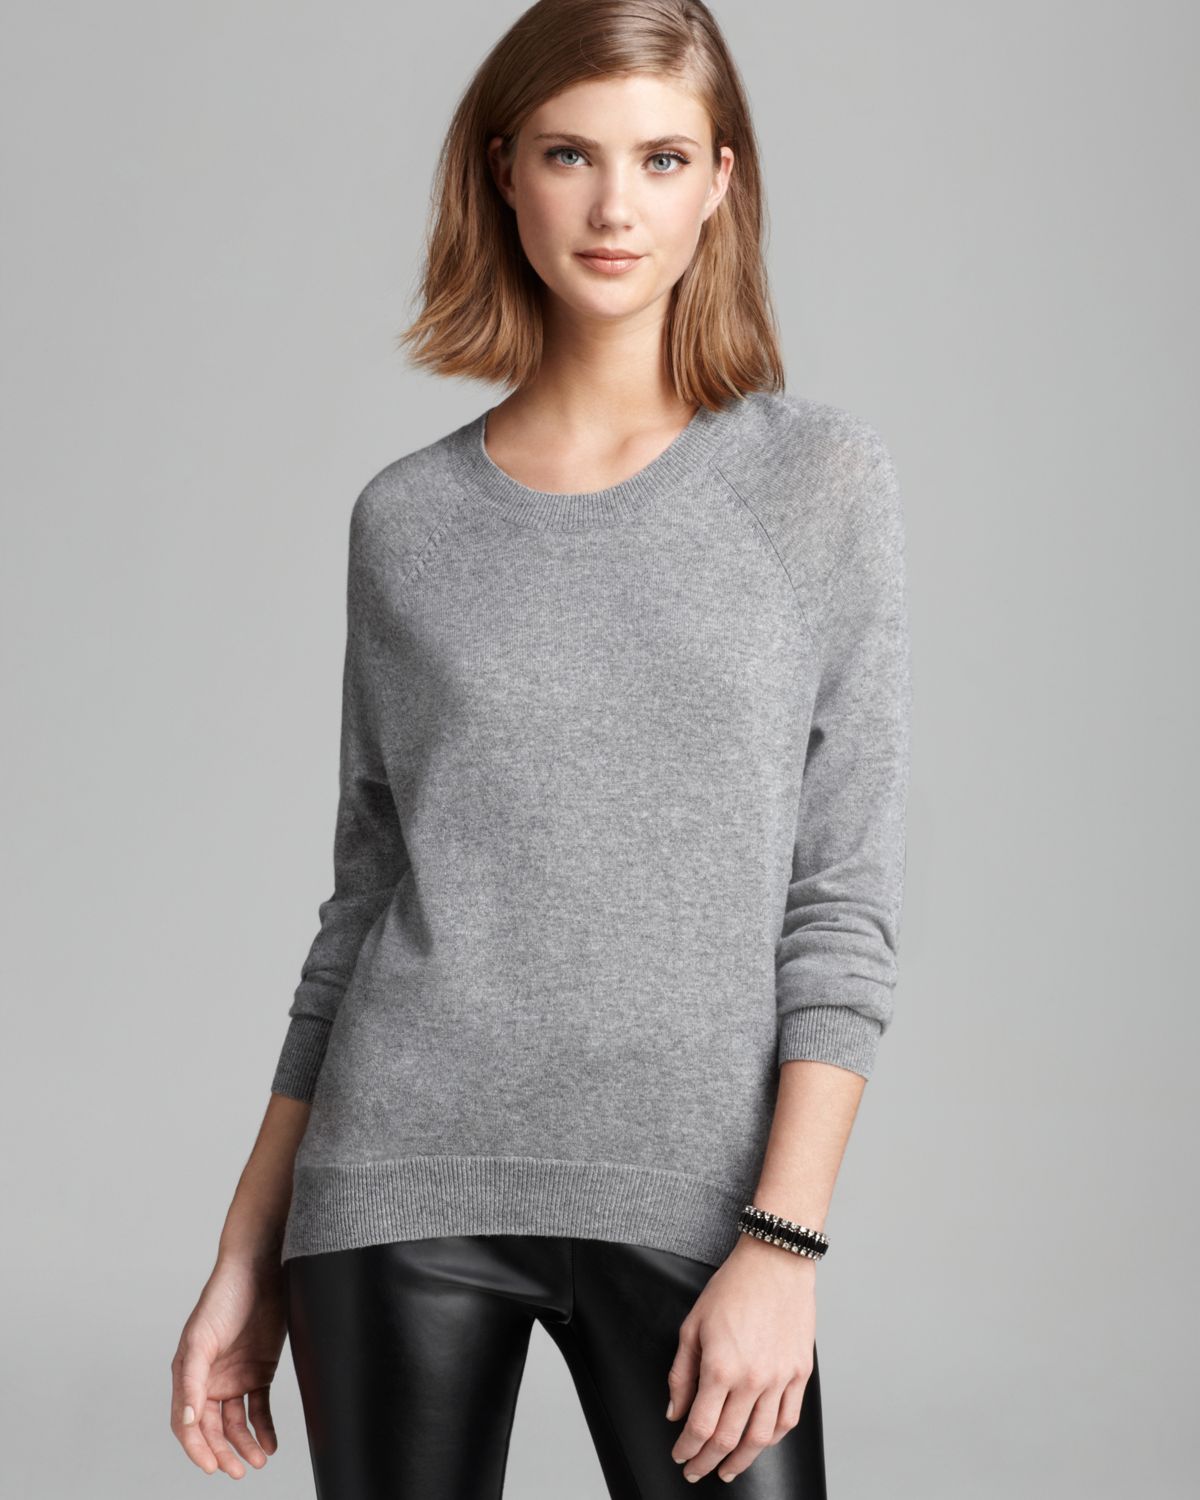 Lyst - Autumn Cashmere Quotation Sweater Zip Back Elbow Patch in Gray